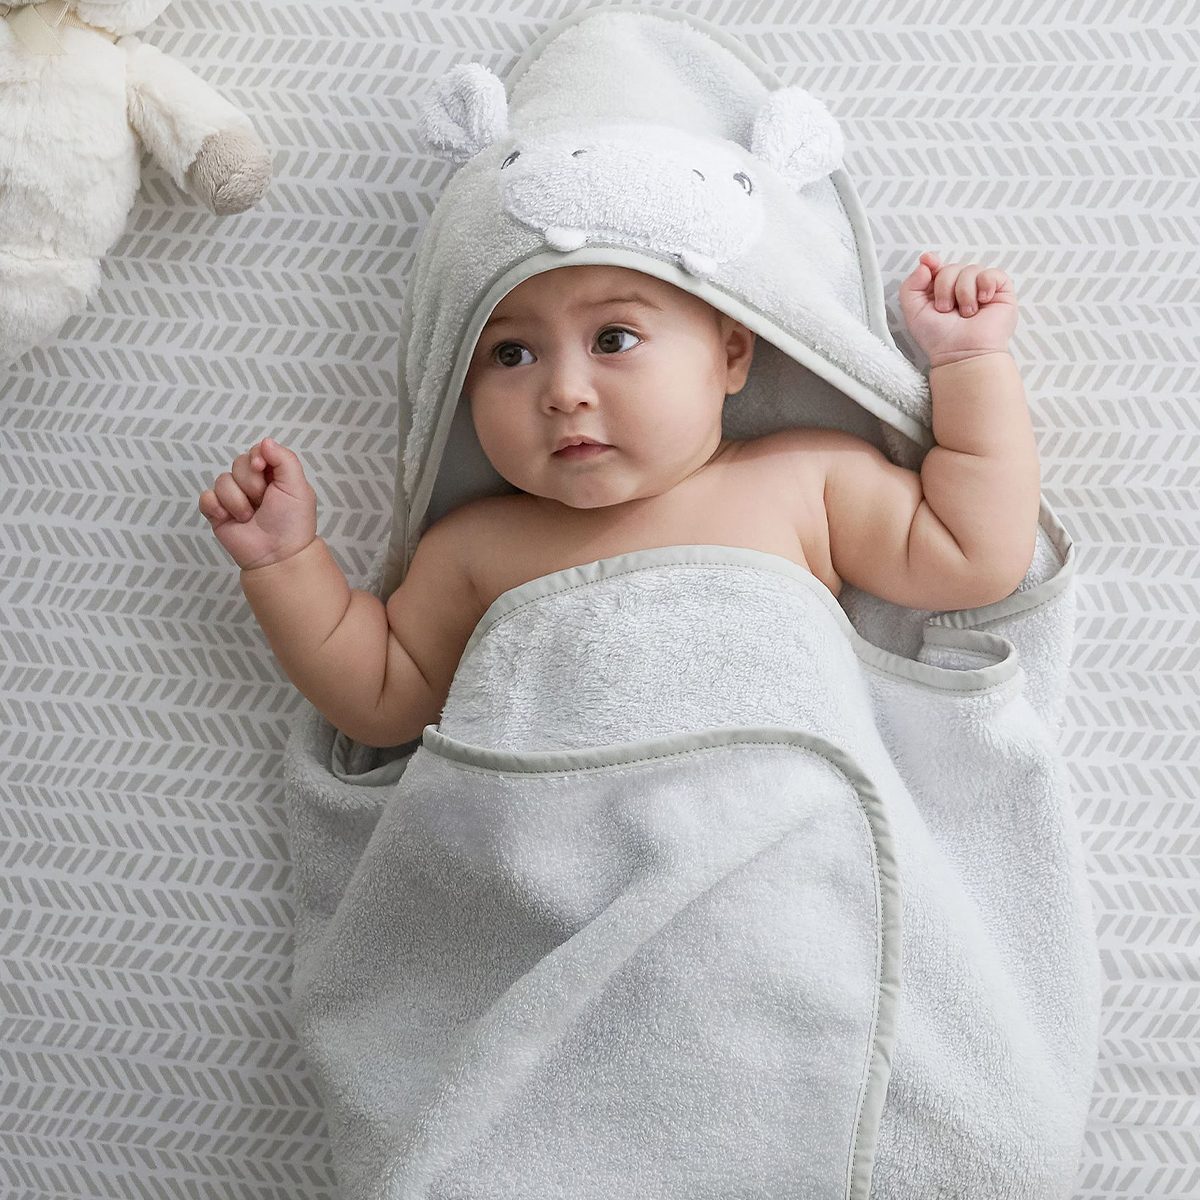 <p>A soft, cozy <a href="https://www.rd.com/list/make-towels-last/">bath towel</a> is always a welcome baby gift. Up the cuteness factor by opting for one of these <a href="https://www.potterybarnkids.com/products/hooded-animal-towel-and-wascloth-sets/" rel="noopener noreferrer">animal-inspired towels</a> and adding the baby's name or monogram. This adorable set is made of 100% cotton and comes with a hooded towel and matching washcloth. New parents won't be able to resist snapping photo after photo of their cuddly little lamb, sweet little lion or squeaky clean bunny.</p> <p class="listicle-page__cta-button-shop"><a class="shop-btn" href="https://www.potterybarnkids.com/products/hooded-animal-towel-and-wascloth-sets/">Shop Now</a></p>